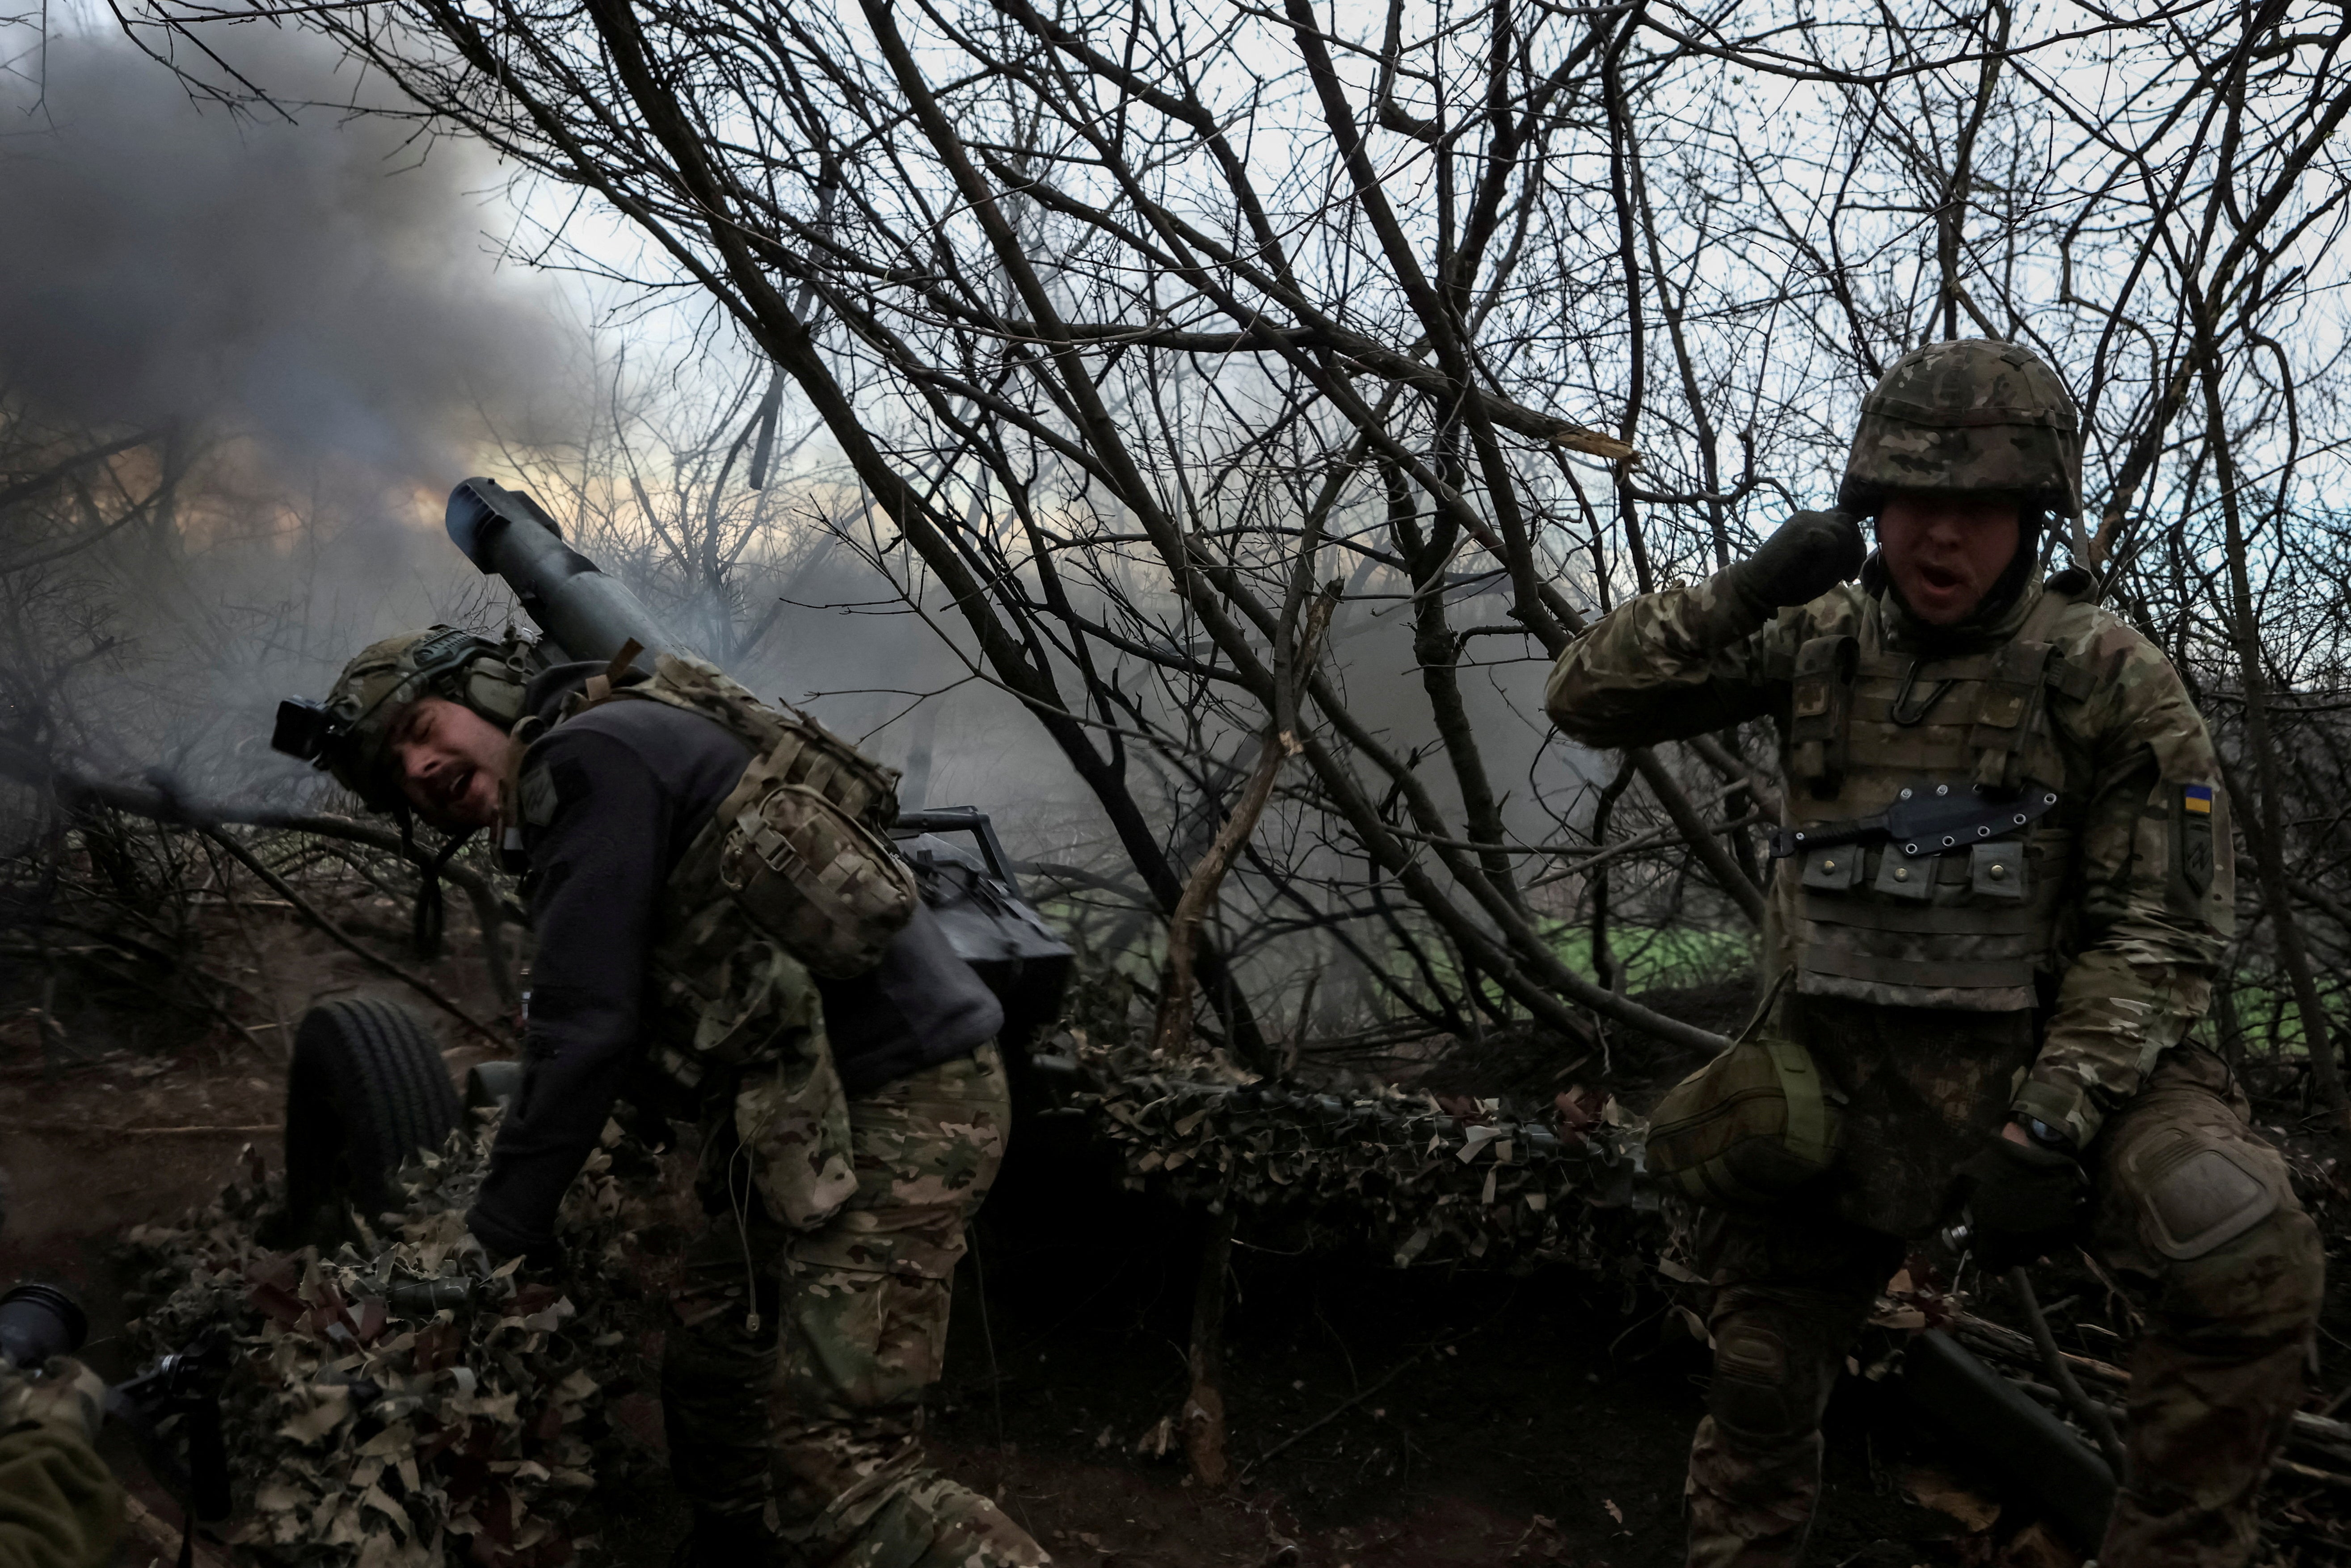 Servicemen of the 12th Special Forces Brigade Azov of the National Guard of Ukraine fire a howitzer towards Russian troops, amid Russia’s attack on Ukraine, in Donetsk region